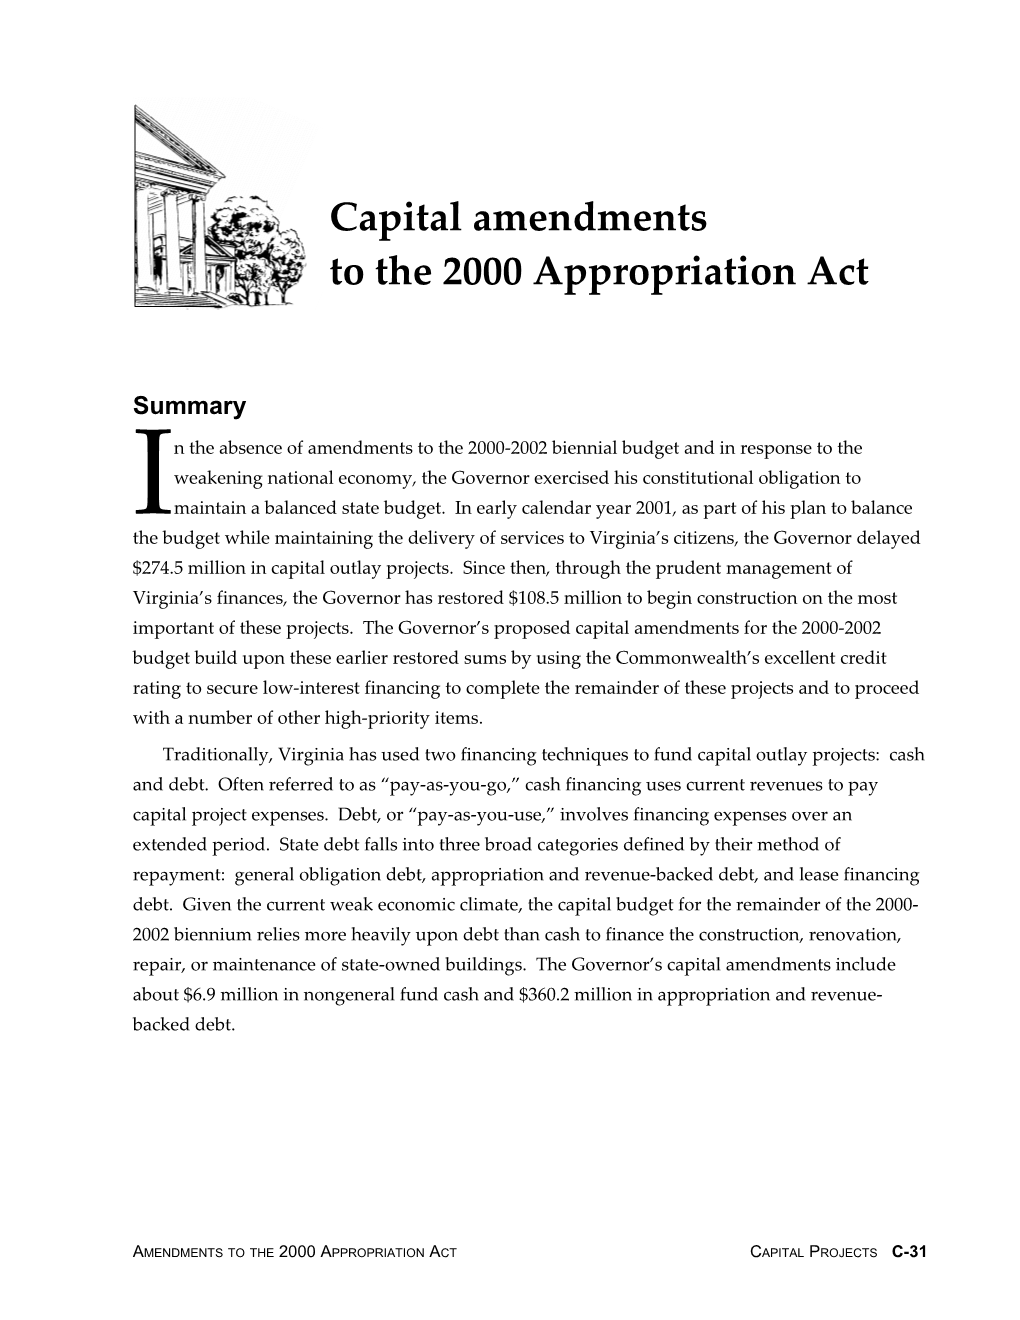 Capital Amendments to the 2000 Appropriation Act